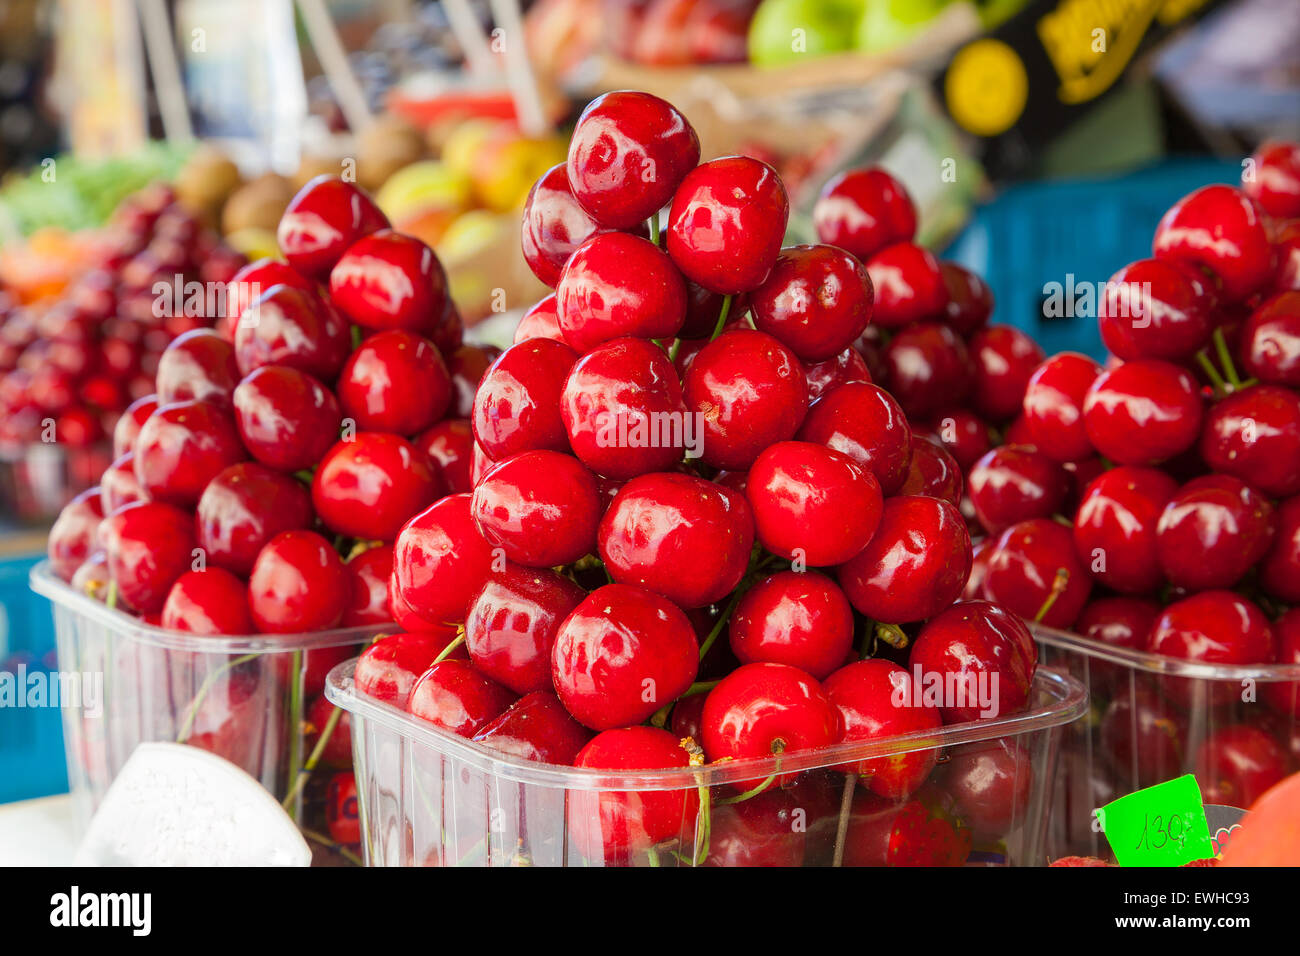 Colorful display of ripe cherries at a food market. Stock Photo